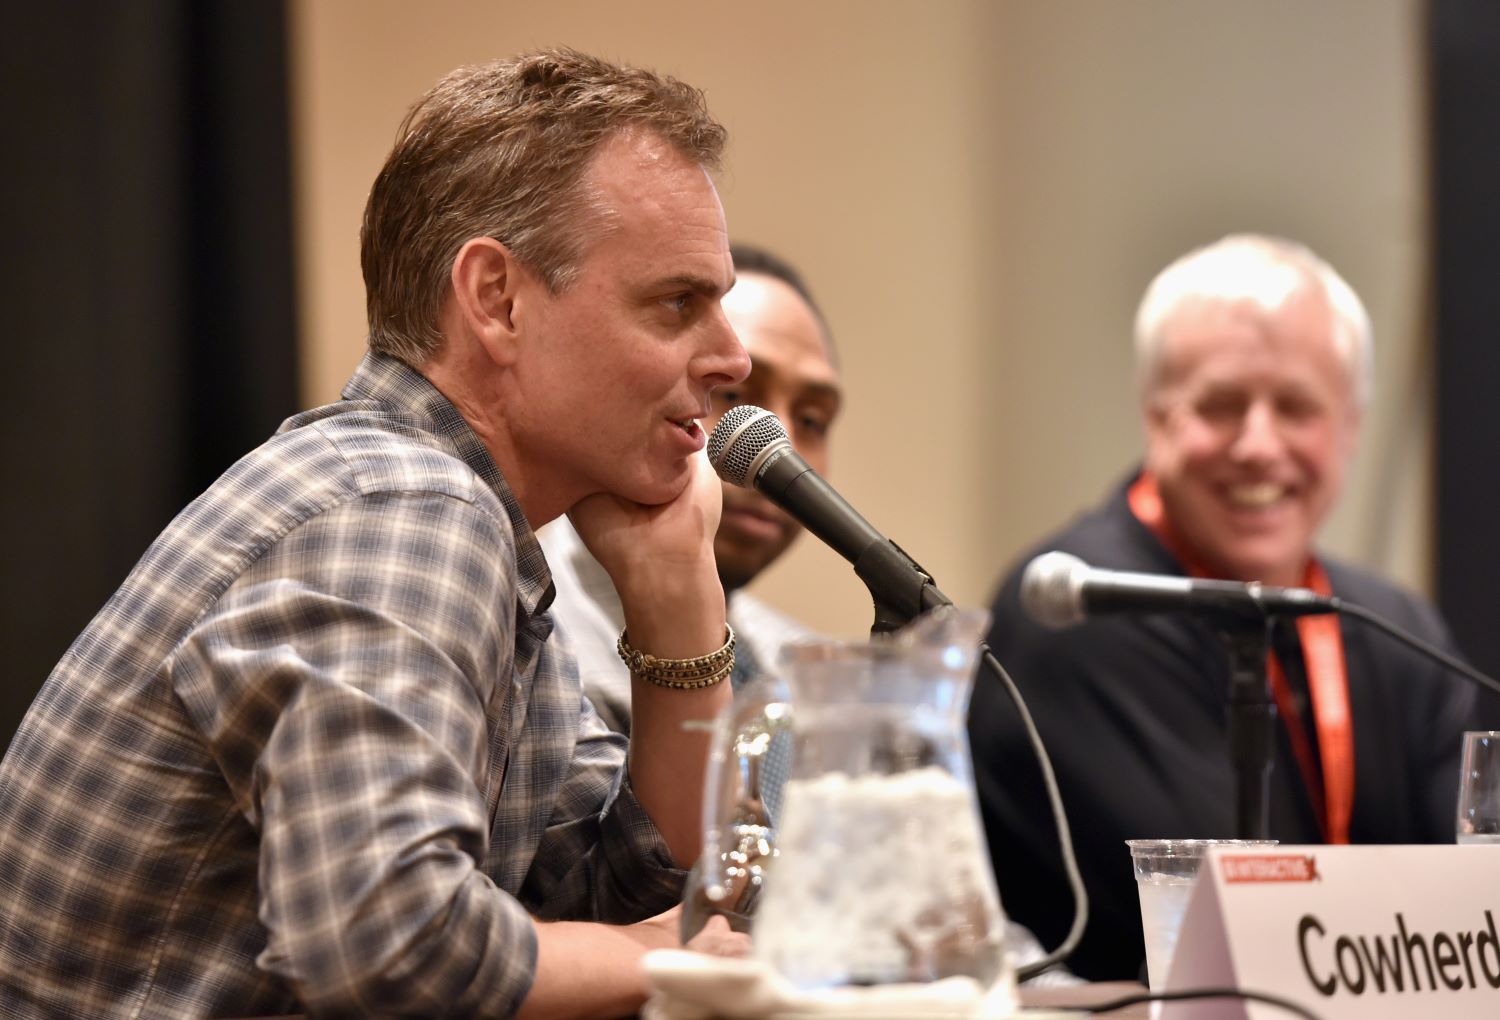 Colin Cowherd dropped a major clue about his next career move on Friday on Twitter.